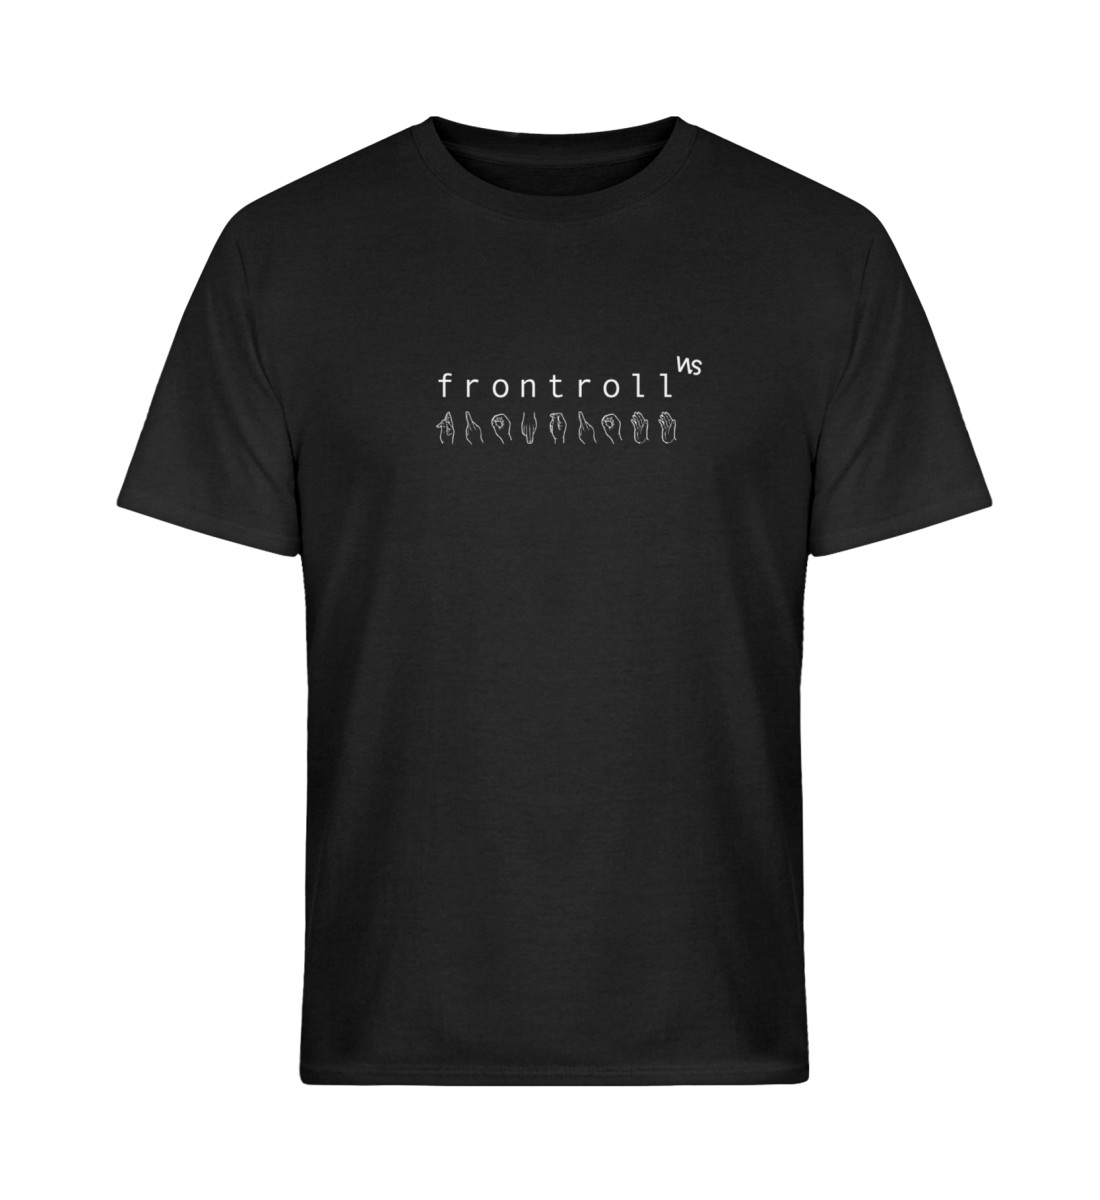 T-shirt Classic Frontroll - Softstyle T-Shirt-16